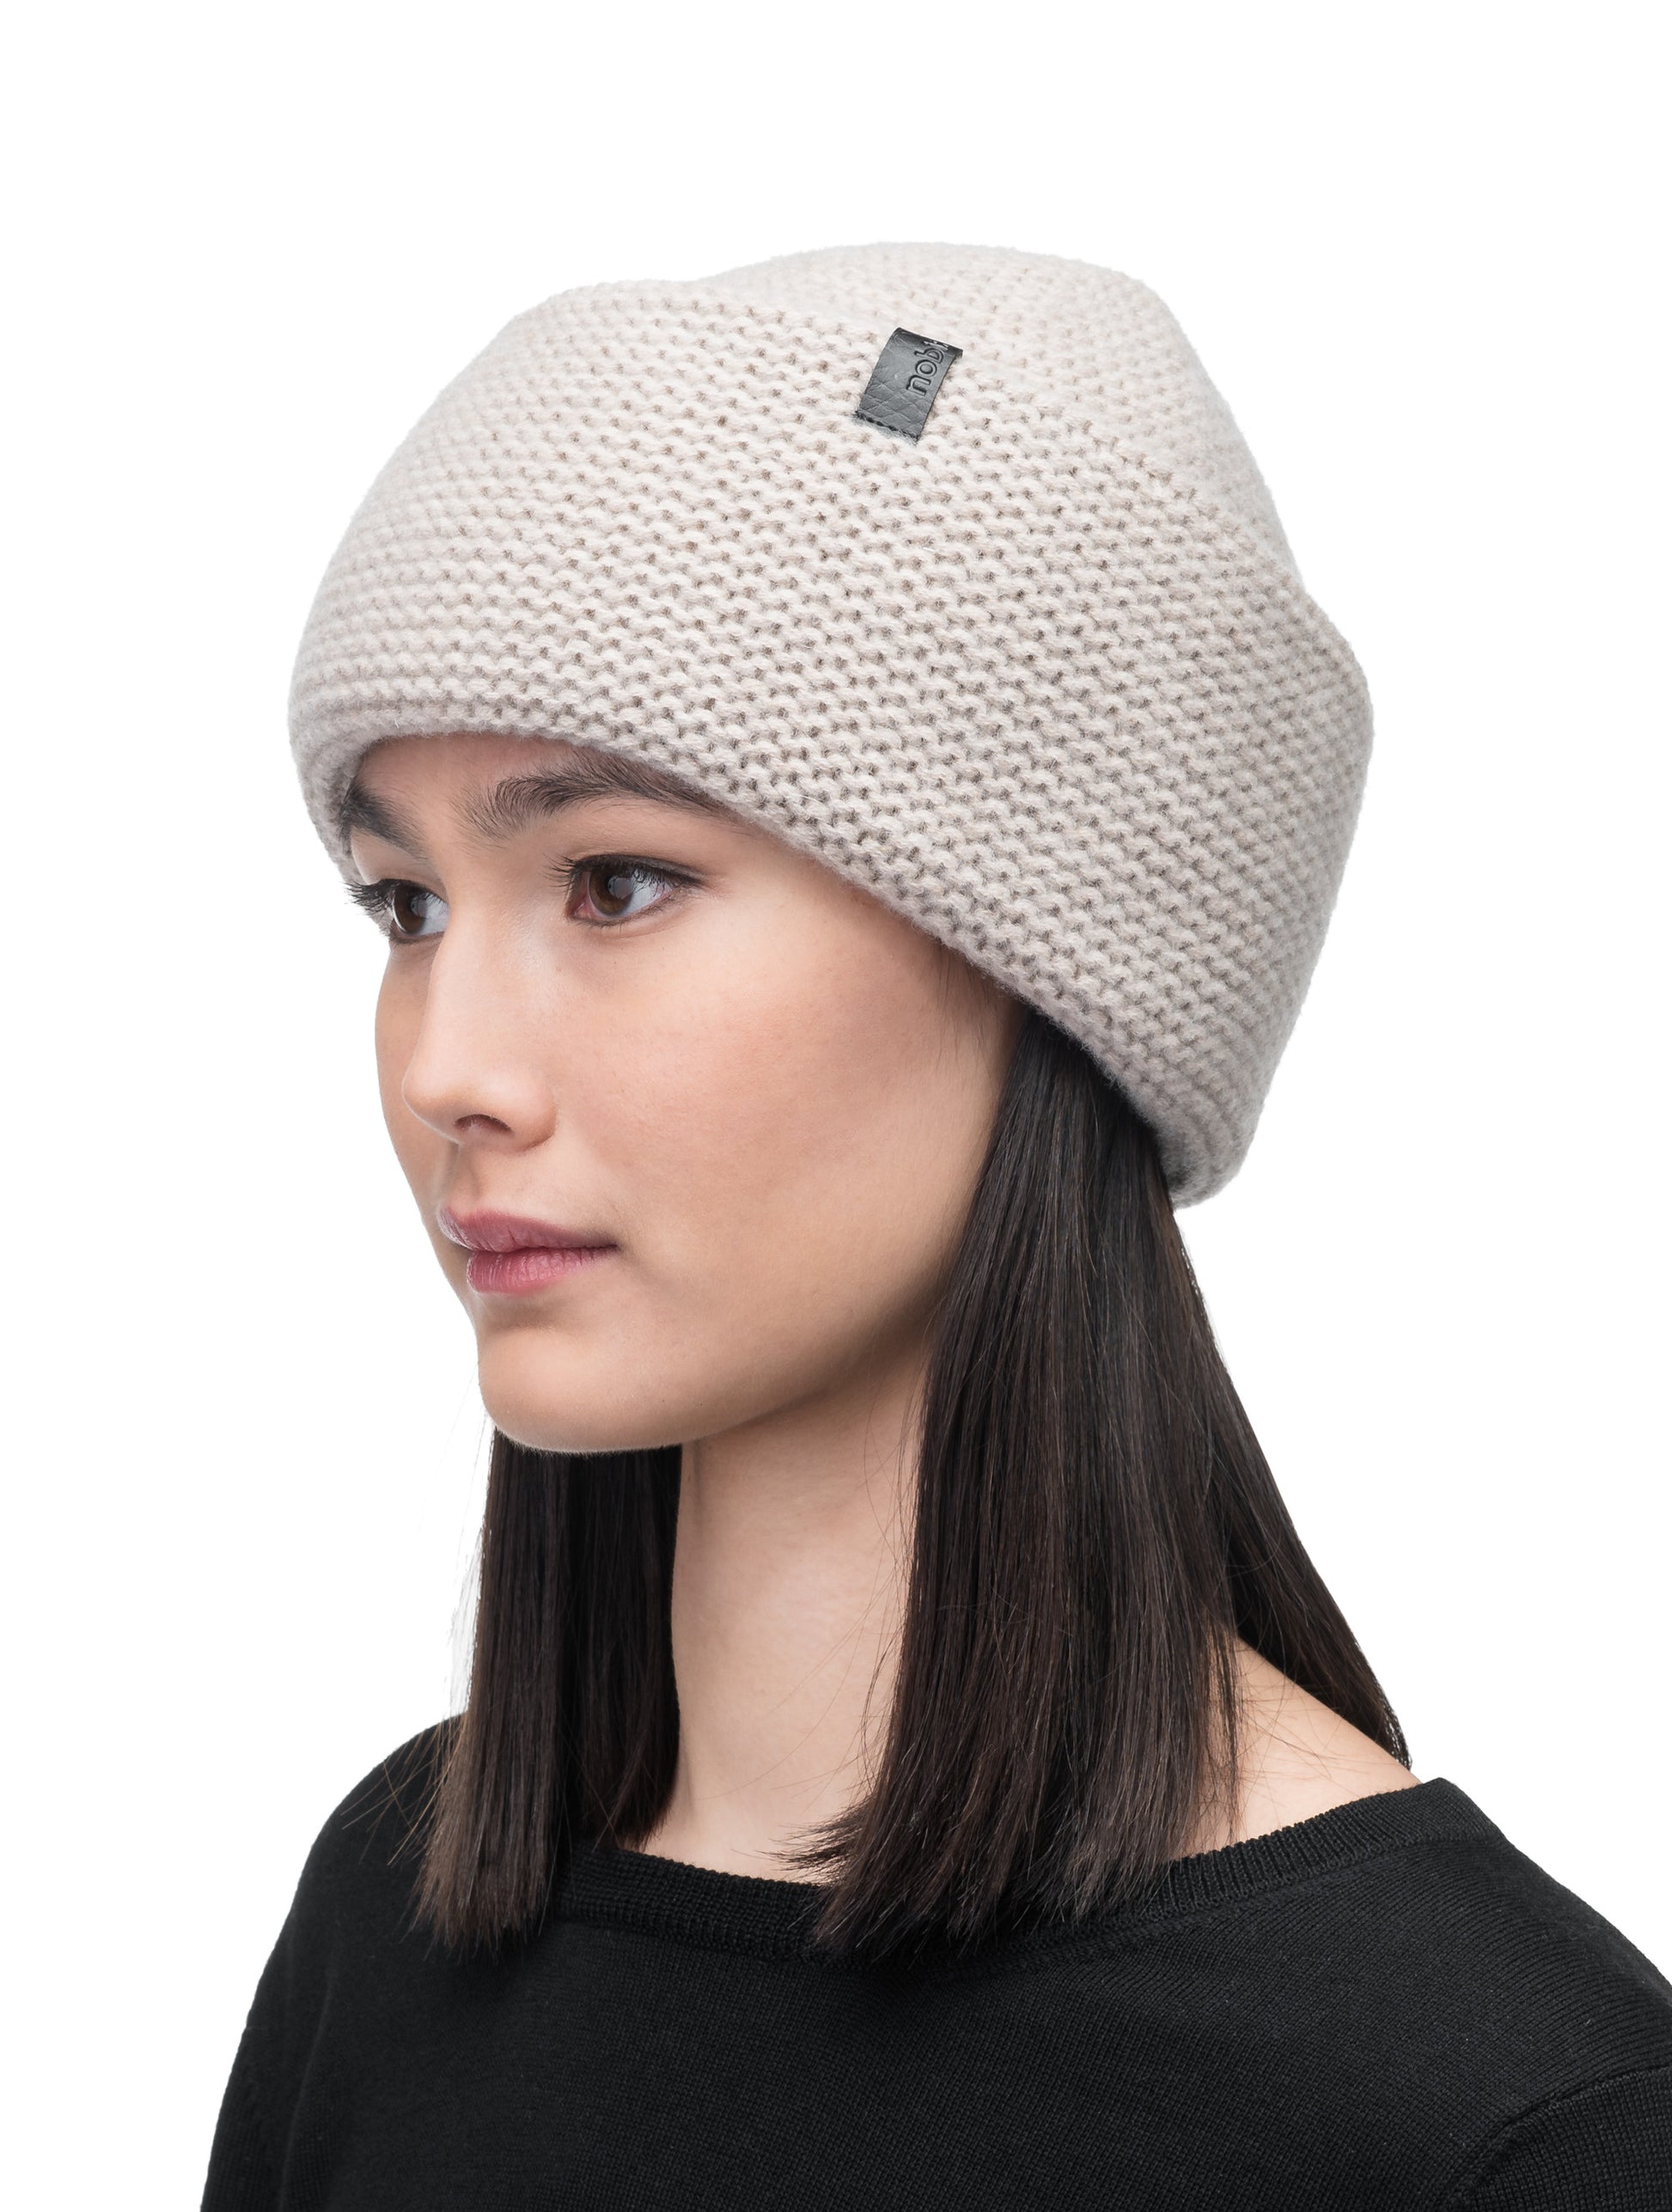 Mira Unisex Purl Knit Beanie in superfine merino wool and cashmere, and Nobis leather label at cuff, in Khaki